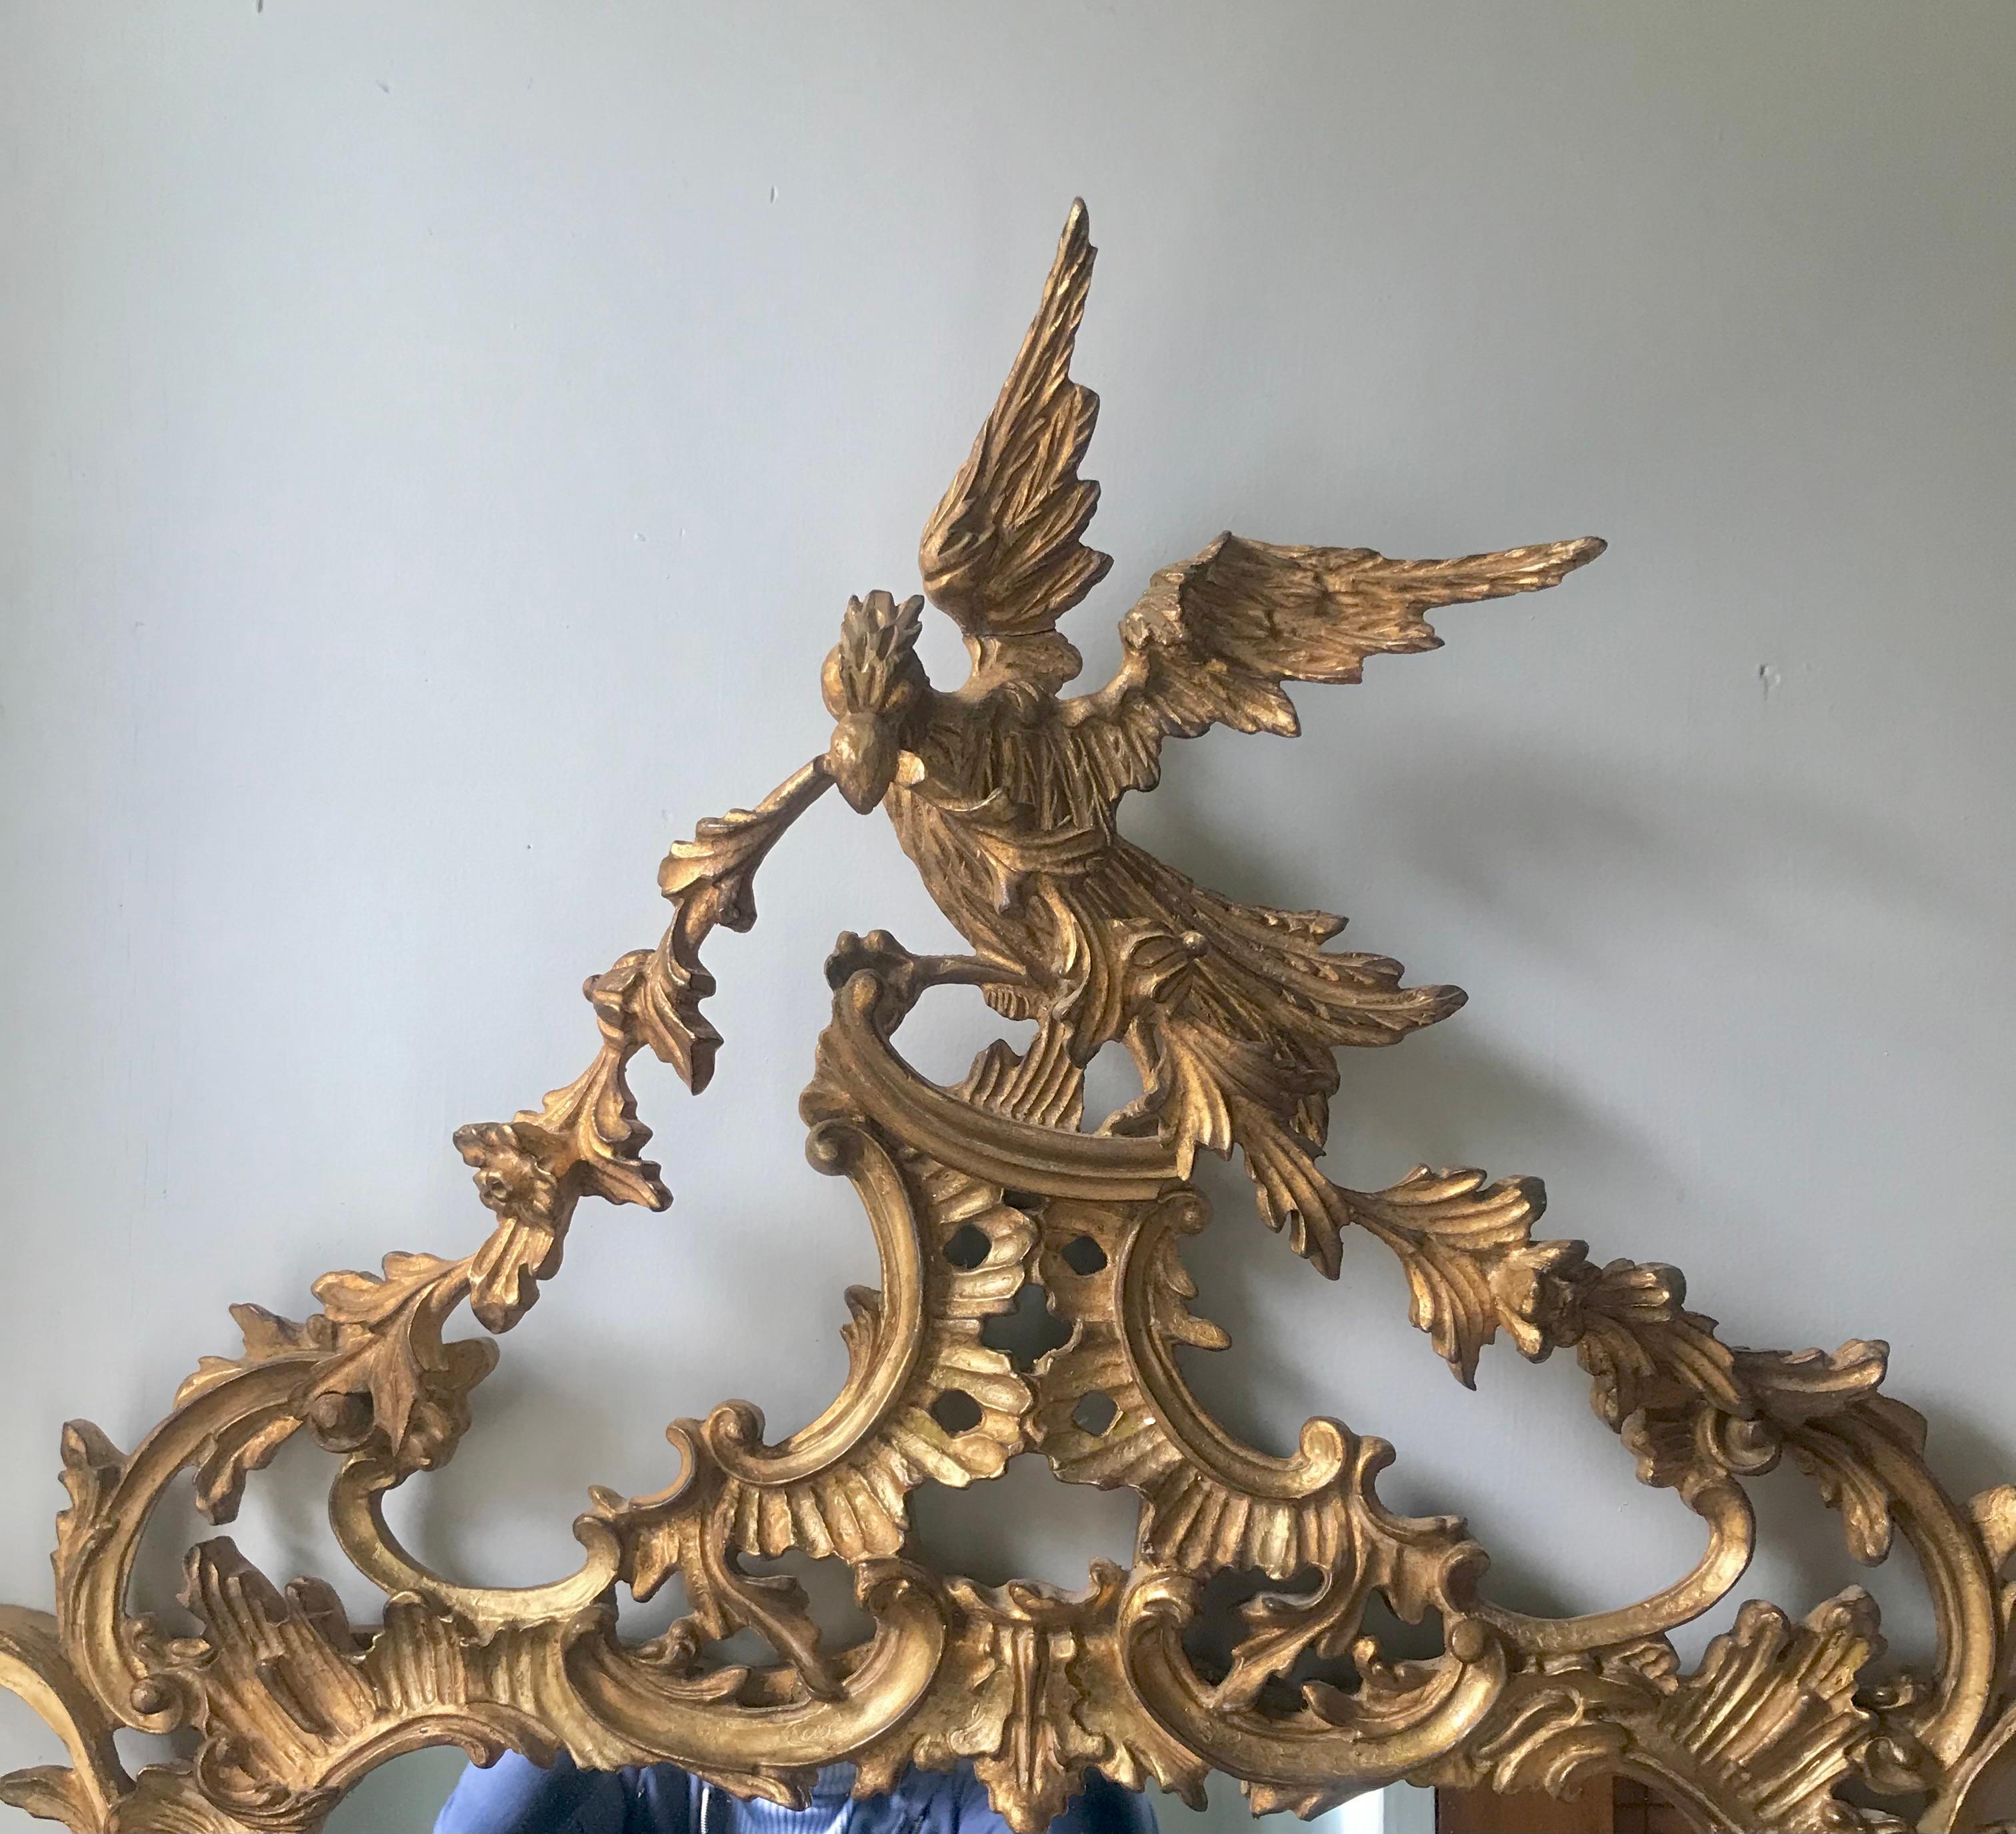 A Magnificent Chippendale design of the 18th century. This Grand Phoenix Chippendale mirror is an impressive 80 